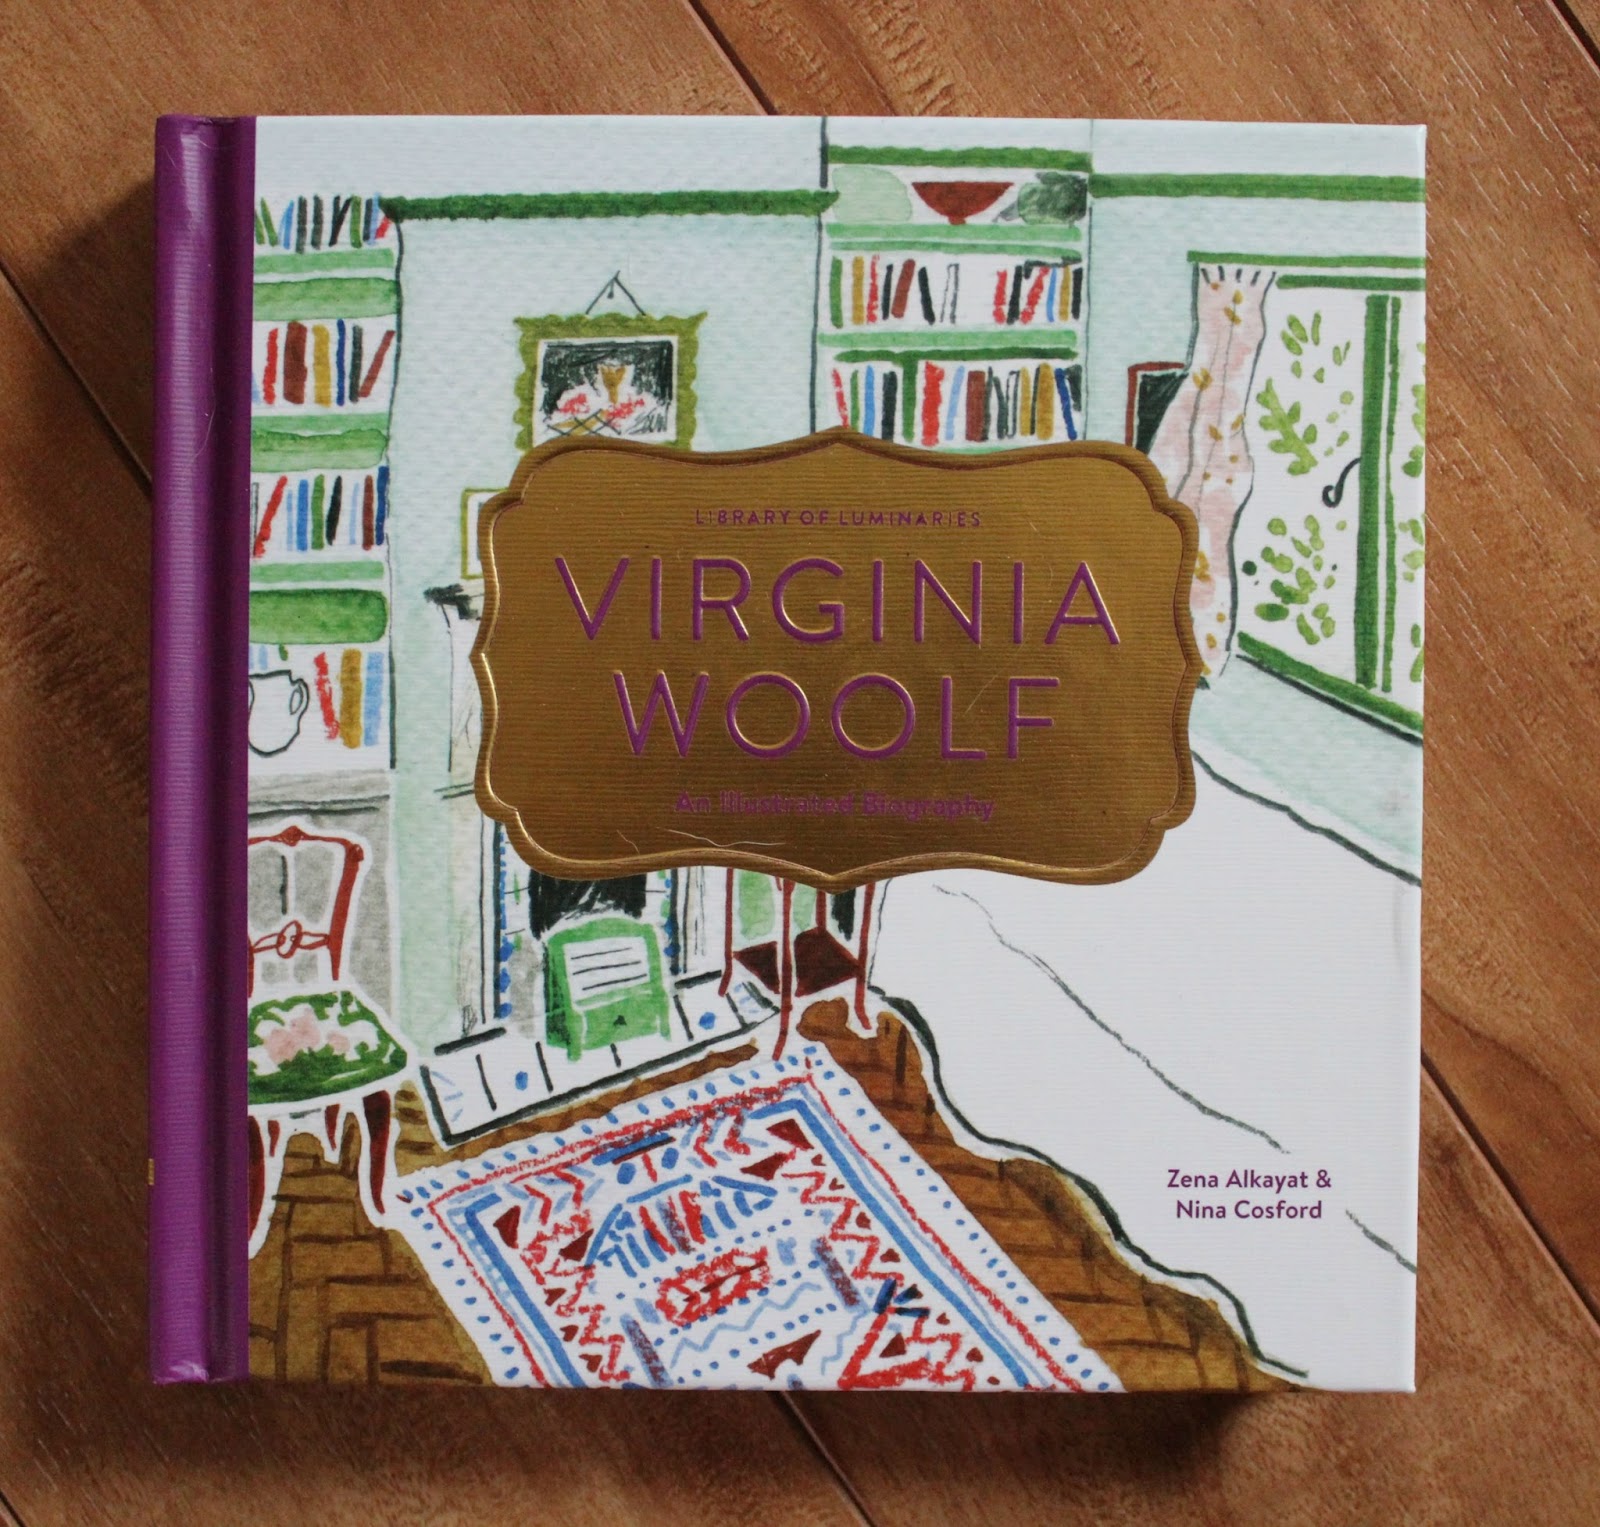 Virginia Woolf ~ Library of Luminaries Book Review